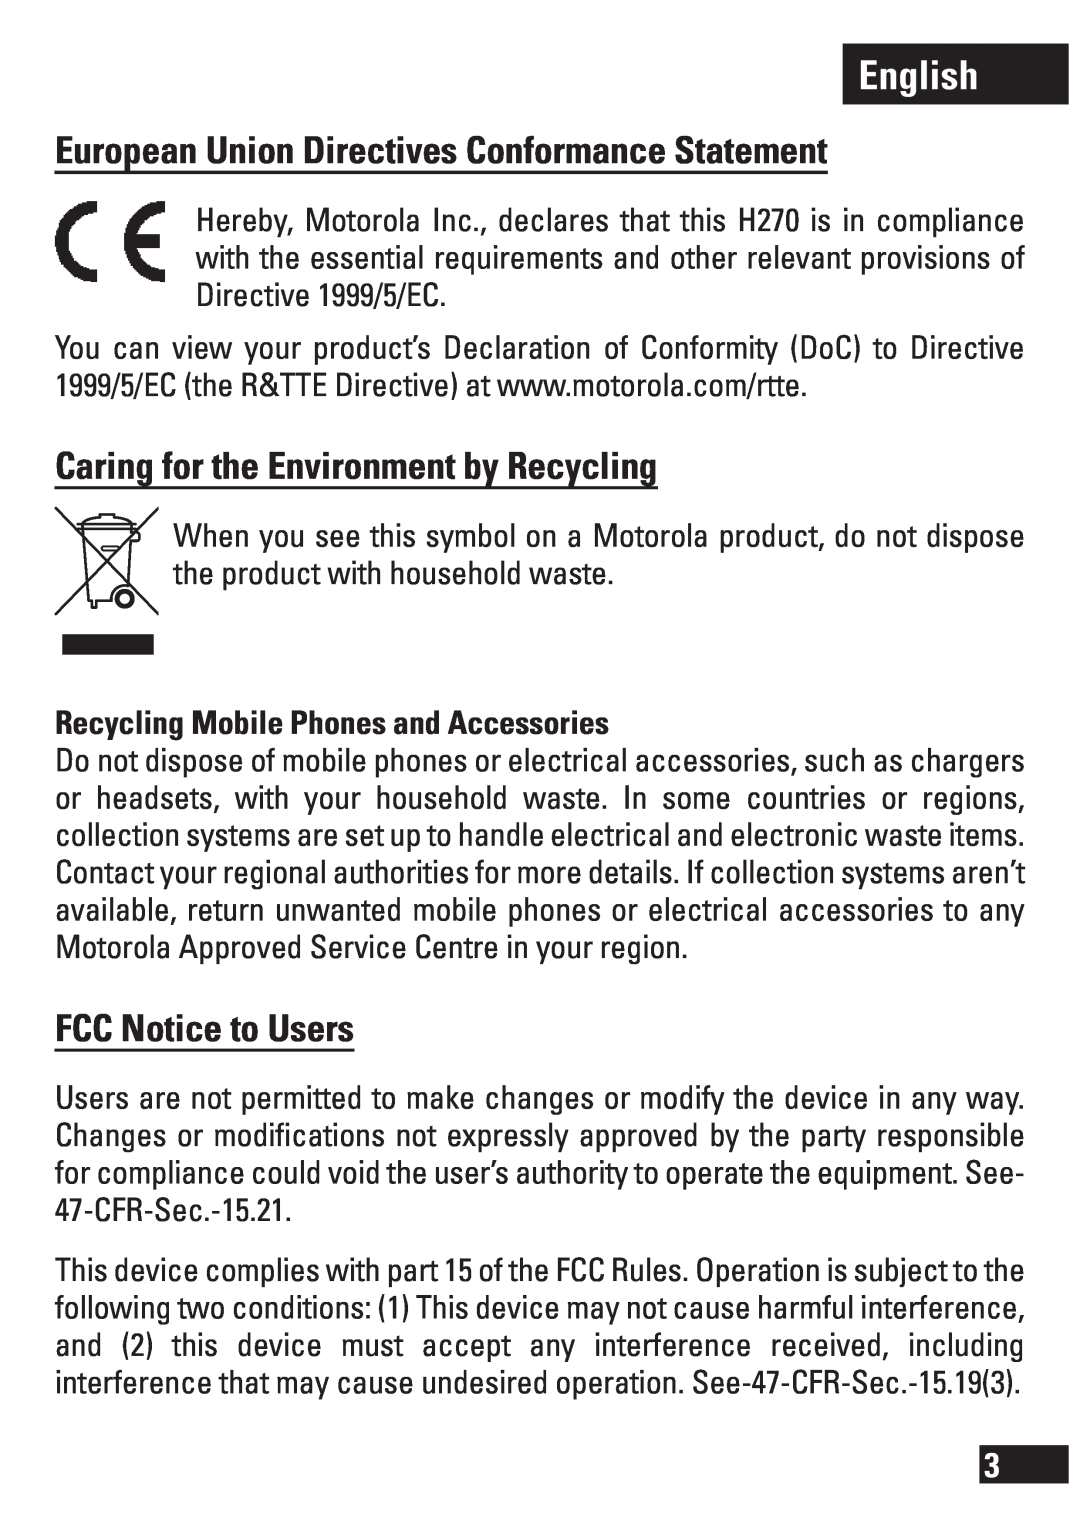 Motorola H270 manual English, European Union Directives Conformance Statement, Caring for the Environment by Recycling 